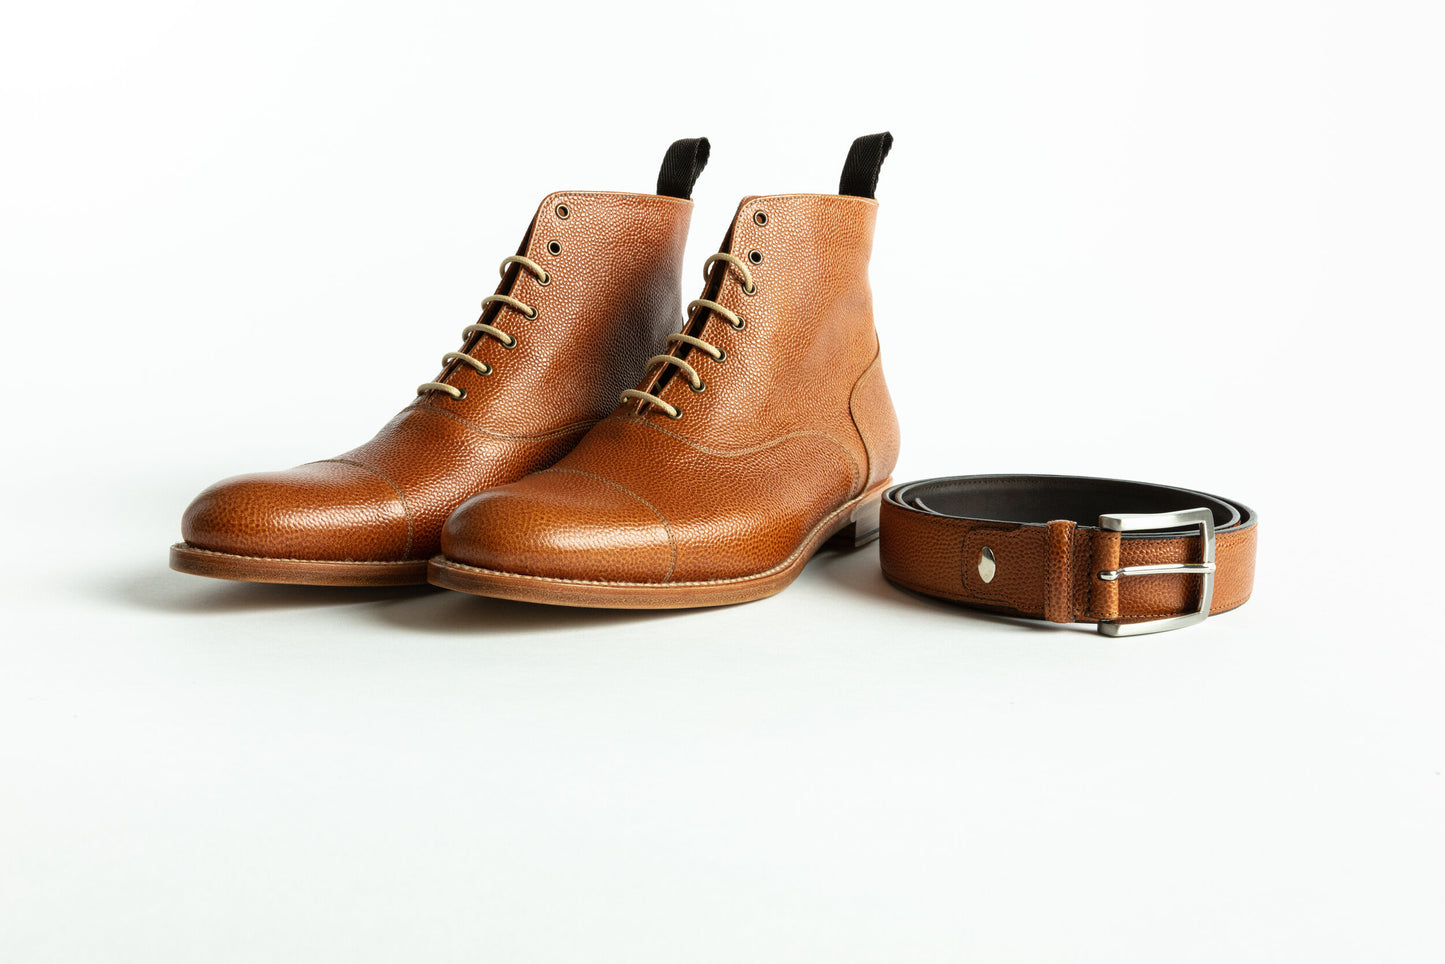 The James Boot in Tan with Matching Belt